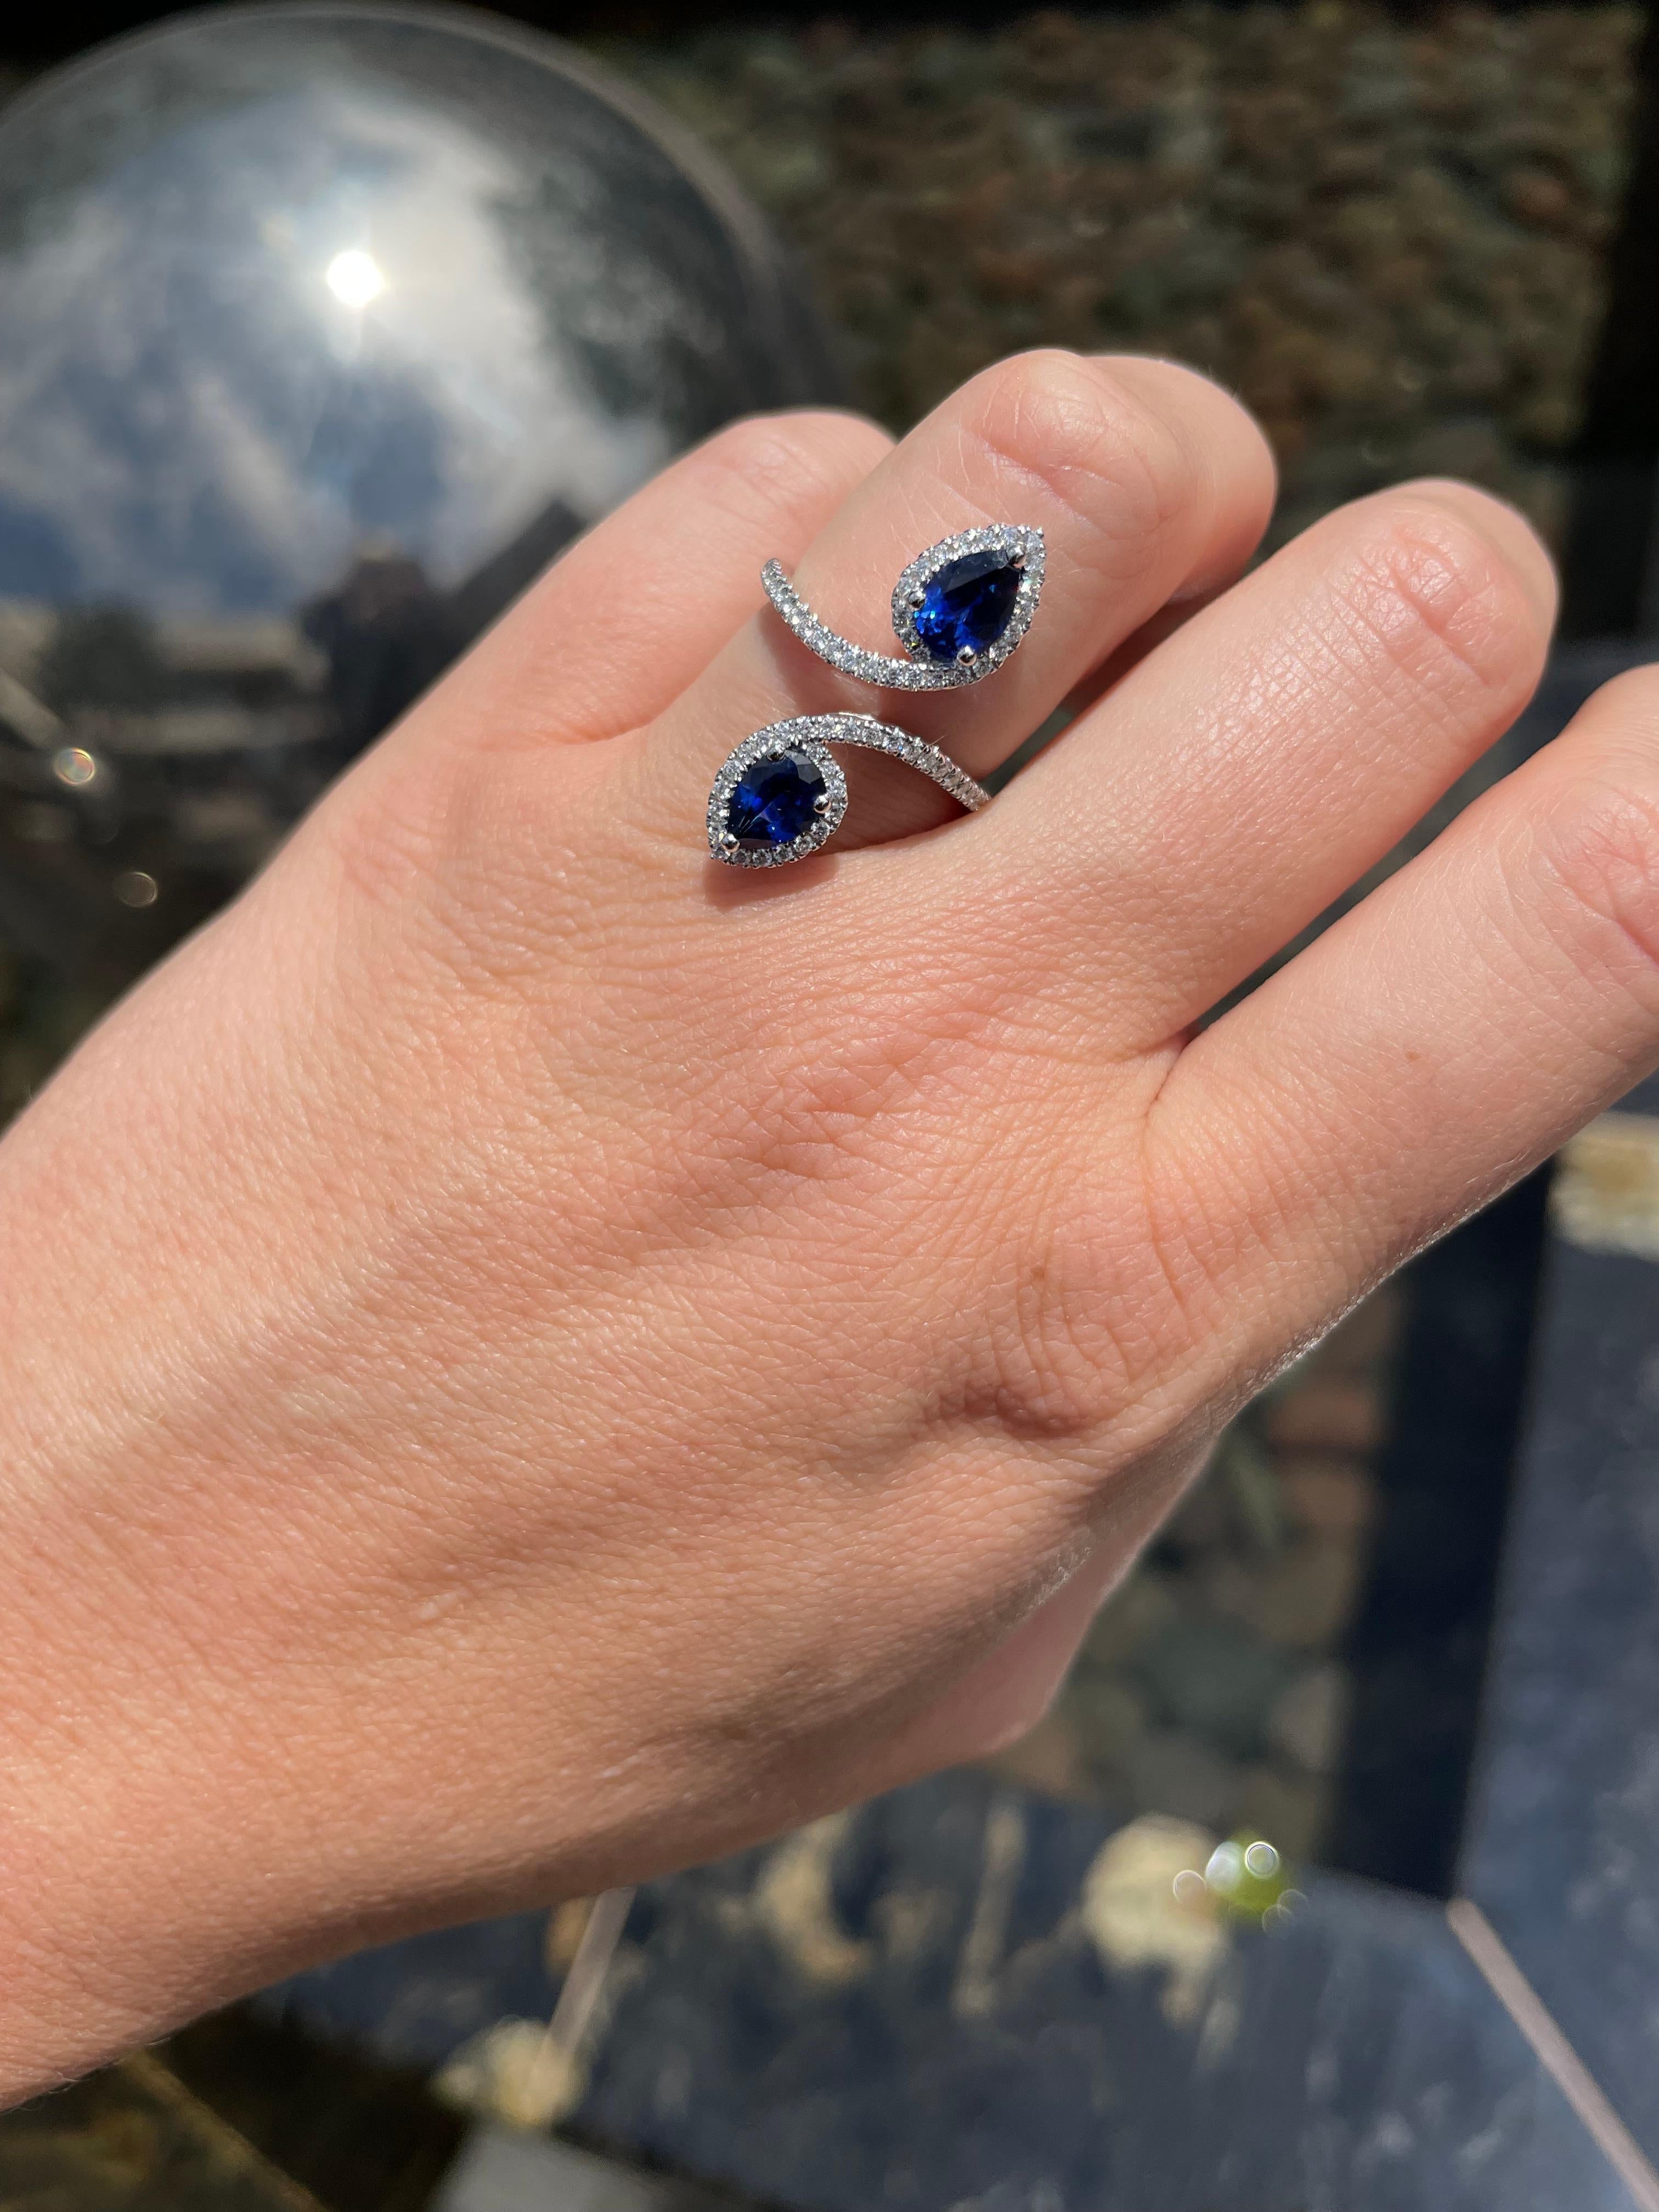 18 karat white gold bypass ring with 2 pear shape blue sapphires weighing a carat total weight of 1.65 carats and 66 round brilliant cut diamonds totaling 0.38 carat total weight.